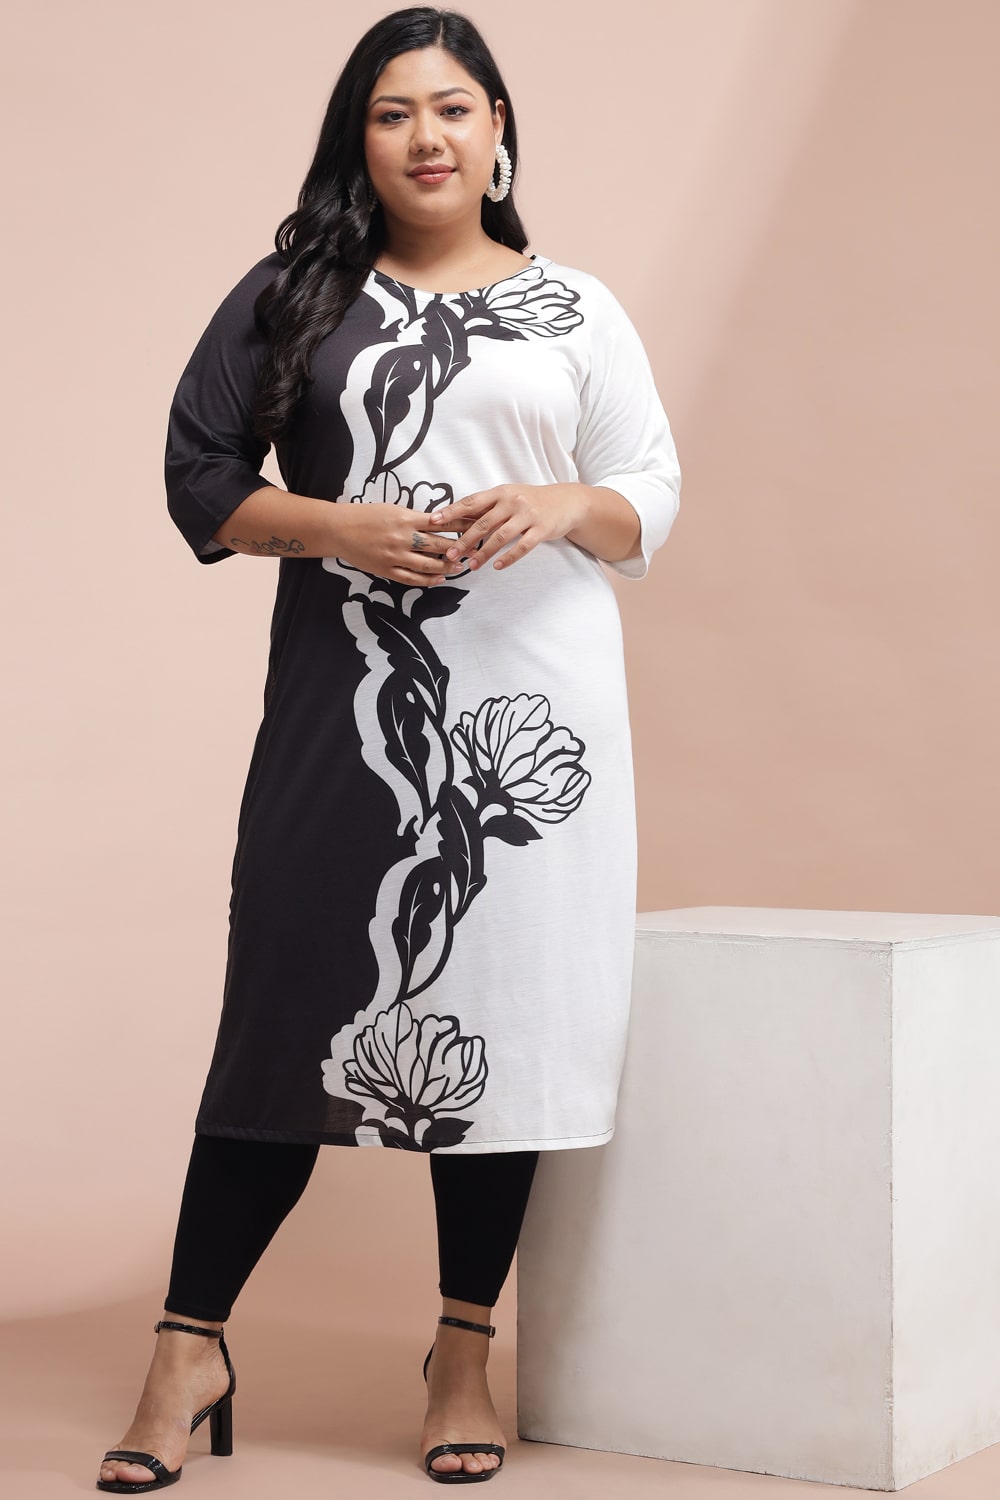 Plus Size Clothing Stores in Delhi